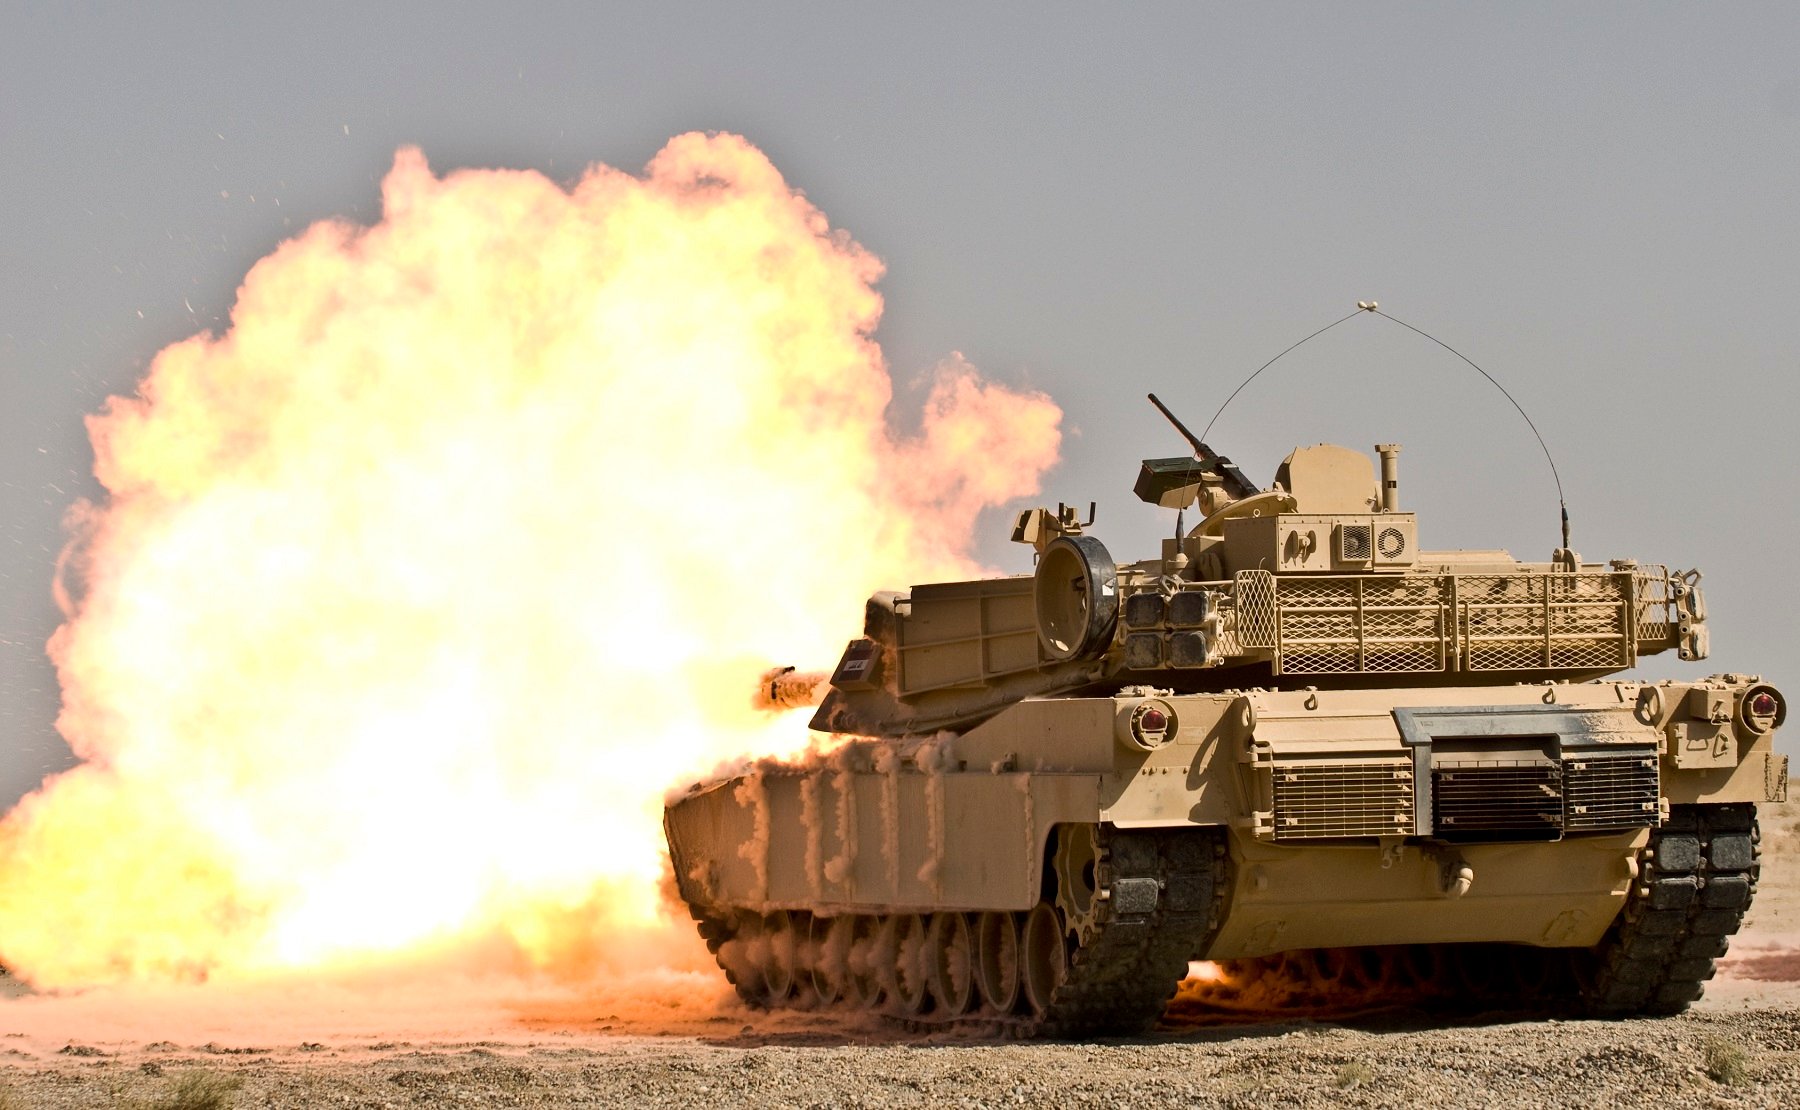 Armored Warriors: The U.S. Army’s New Tank Is a Beast